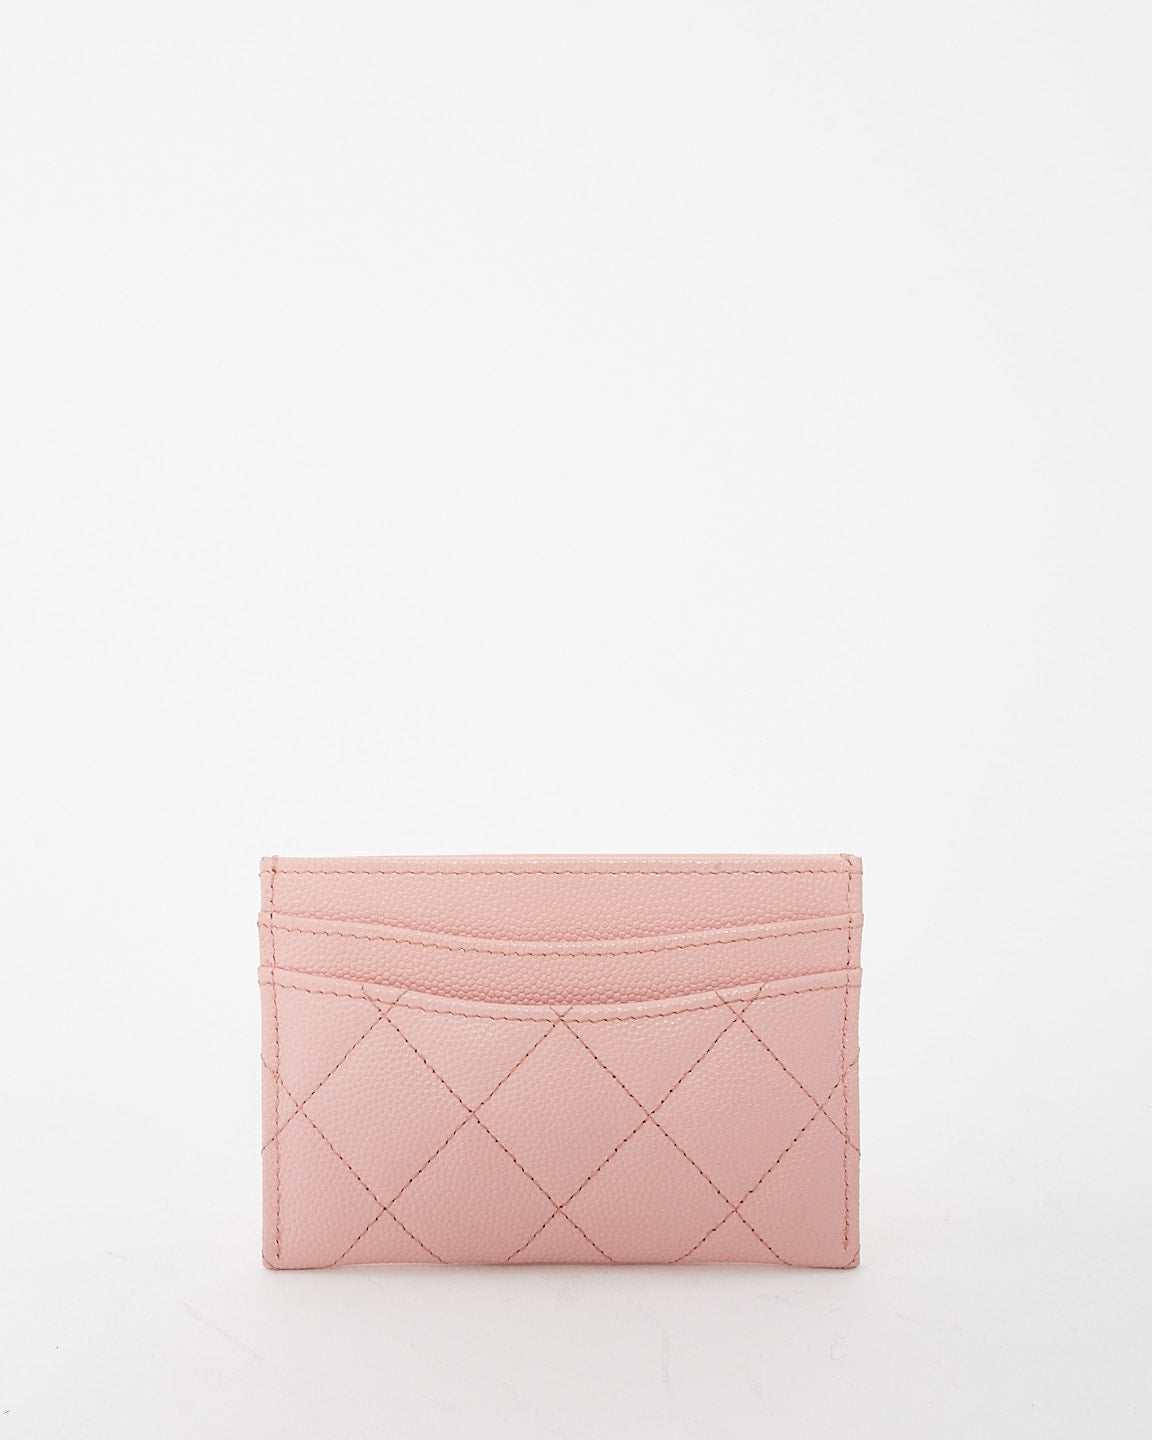 Chanel Pink Caviar Quilted Leather Card Holder